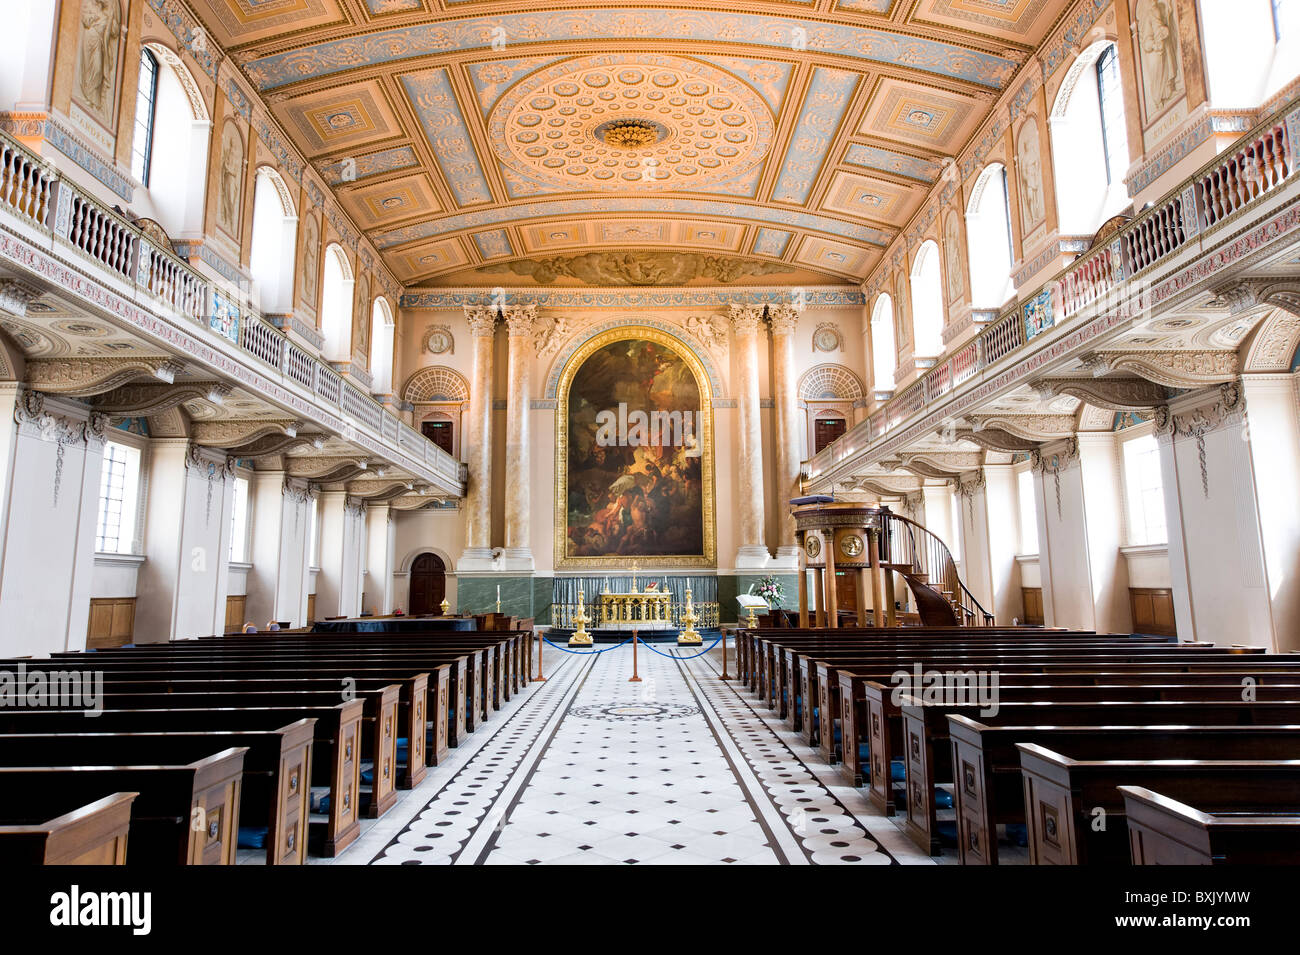 The Chapel of St Peter and St Paul at the Old Royal Naval College, Greenwich, London, England, Britain, UK Stock Photo